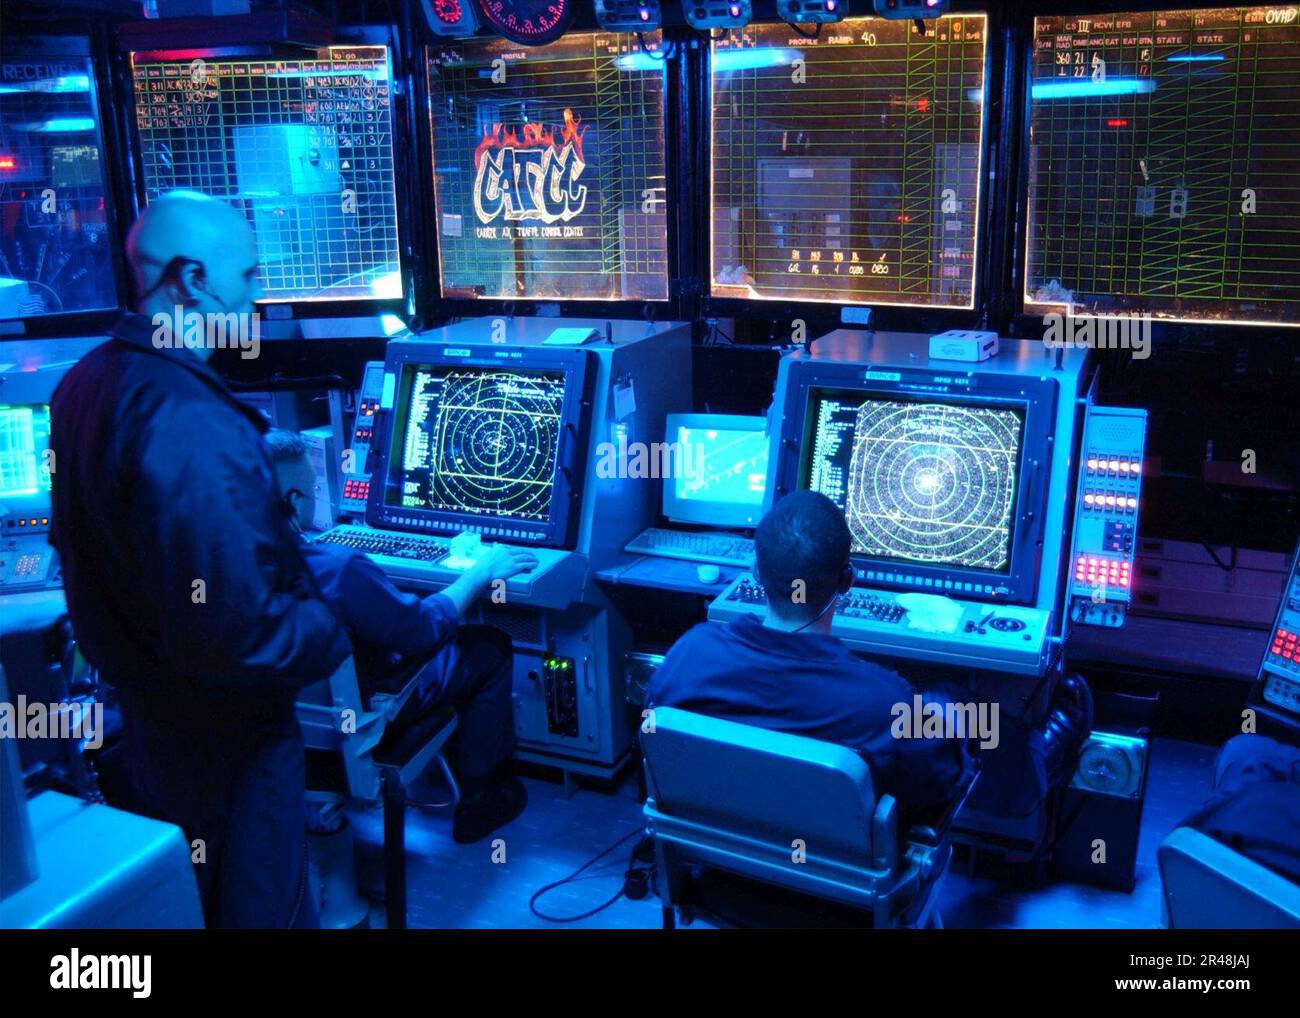 US Navy Carrier Air Traffic Control Center (CATCC) Stock Photo